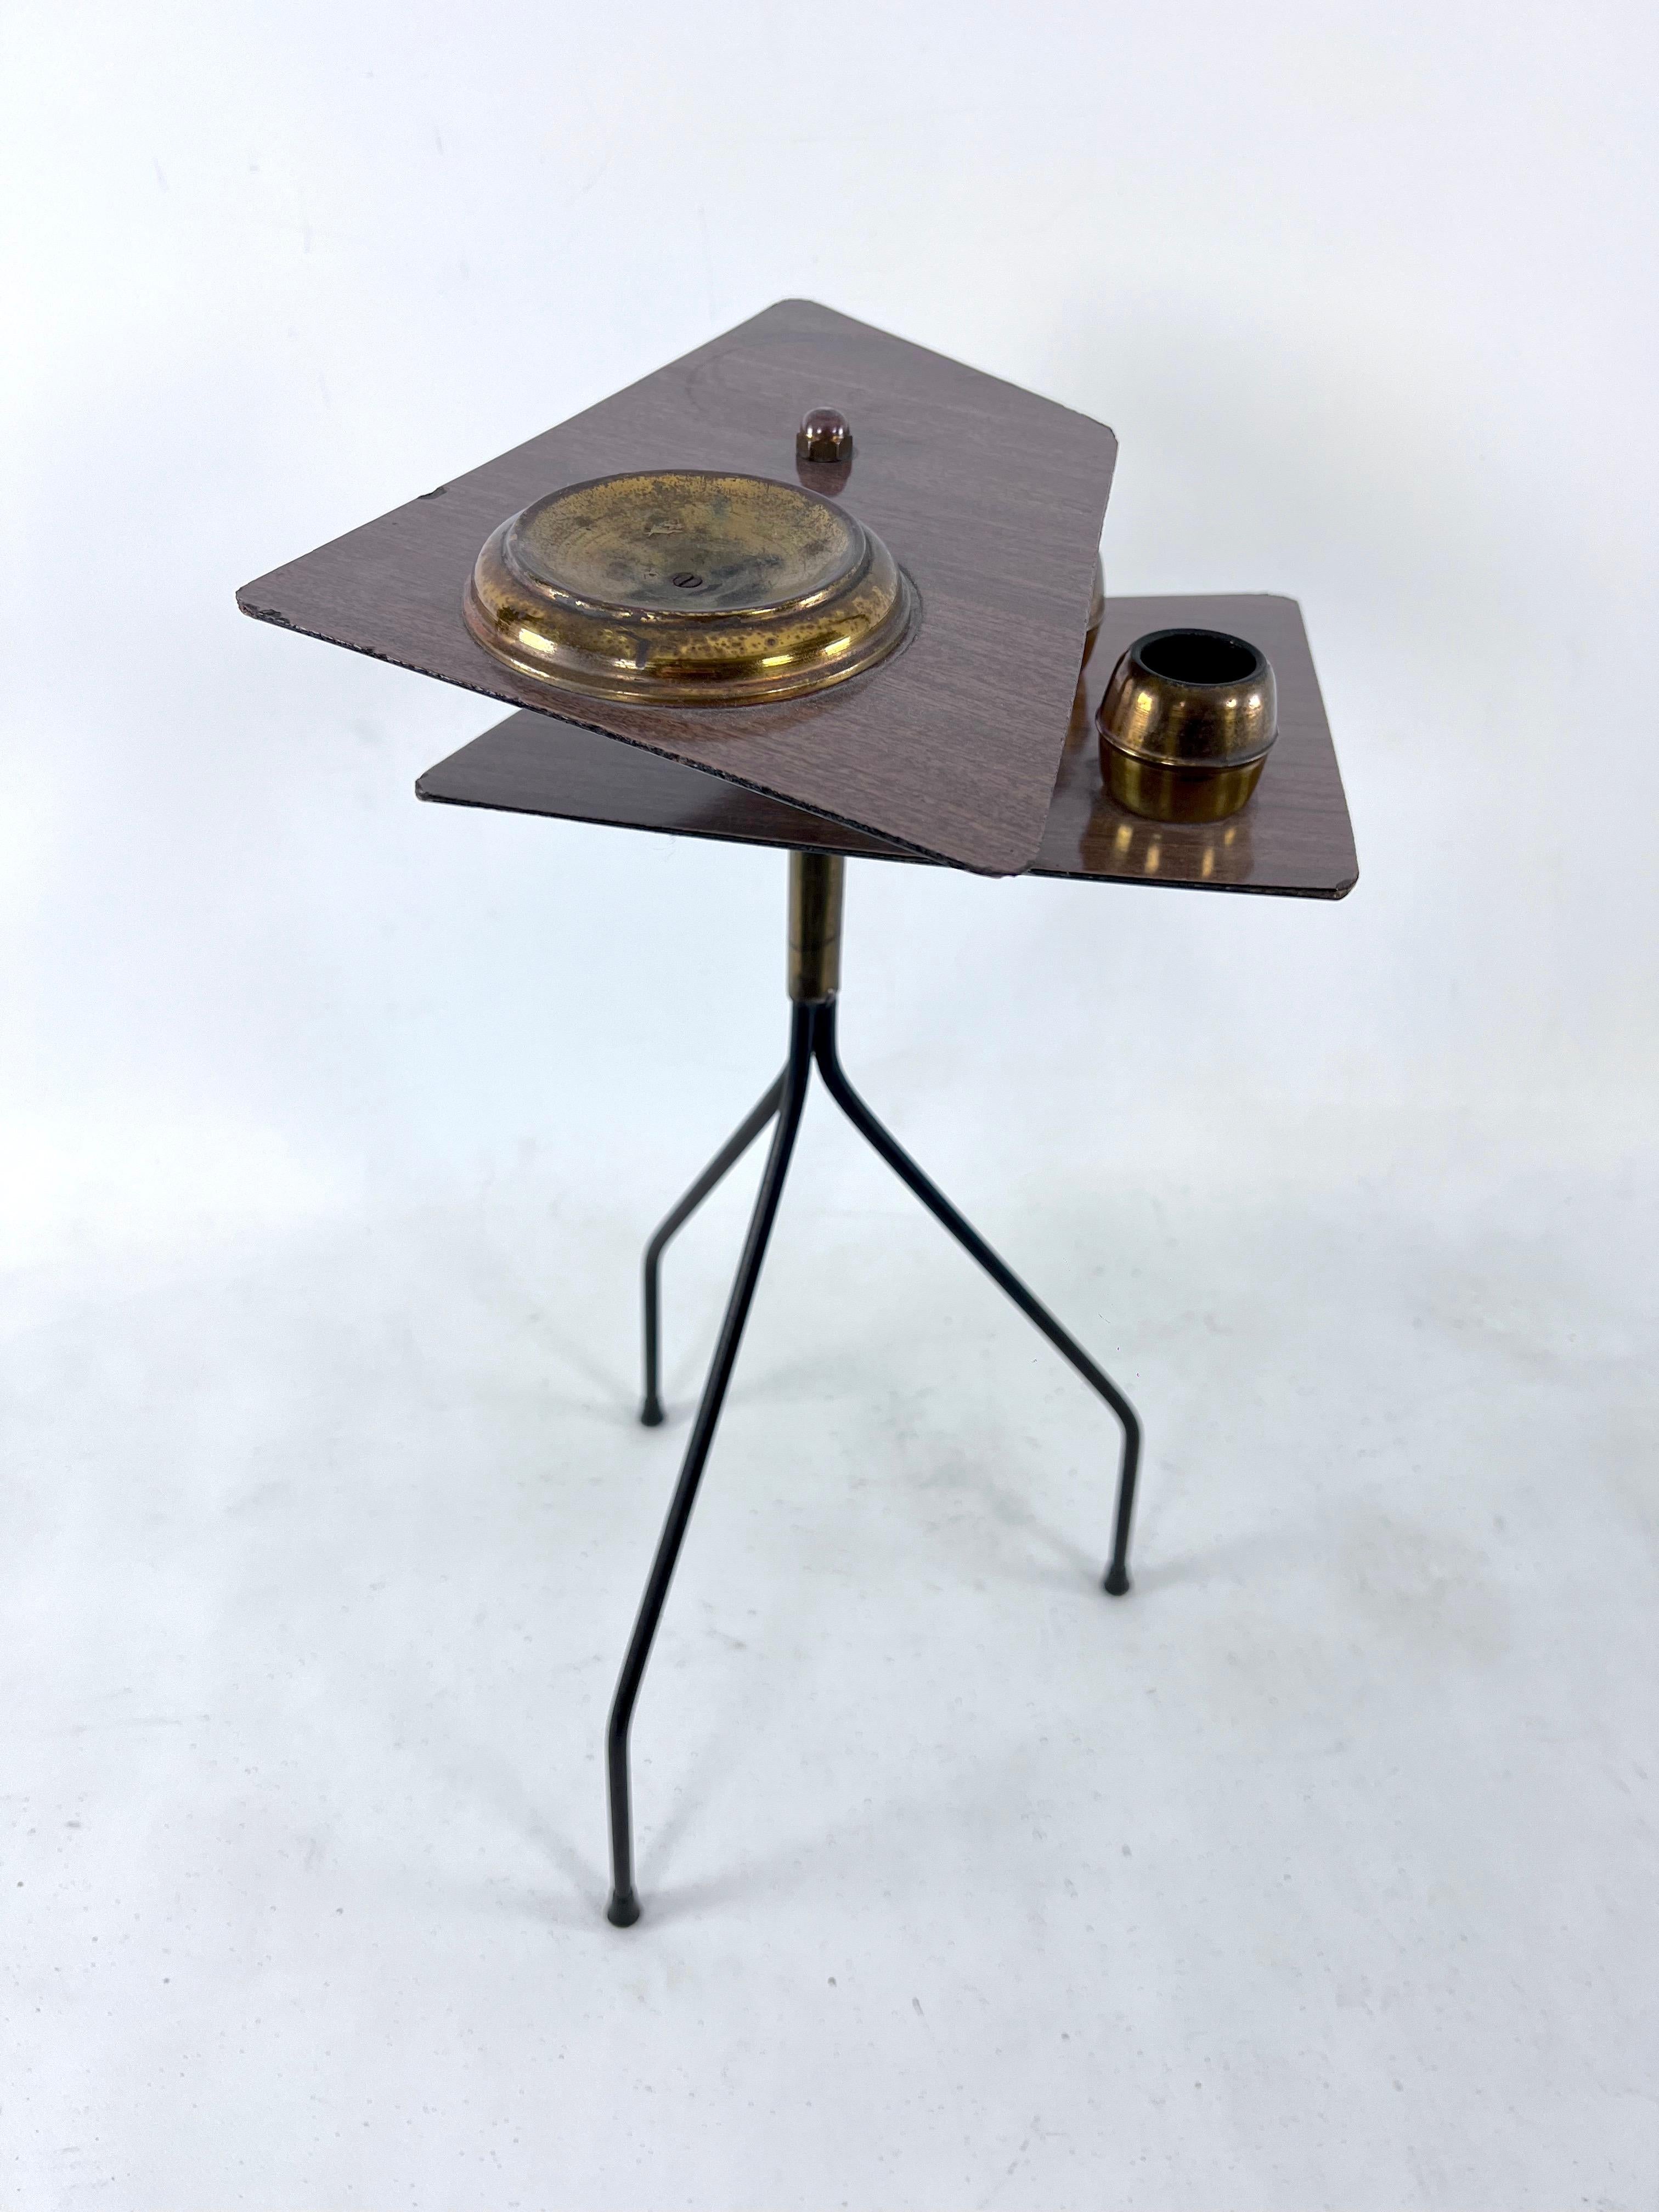 Midcentury Ashtray Tripod in Brass and Formica, Italy, 1950s For Sale 5